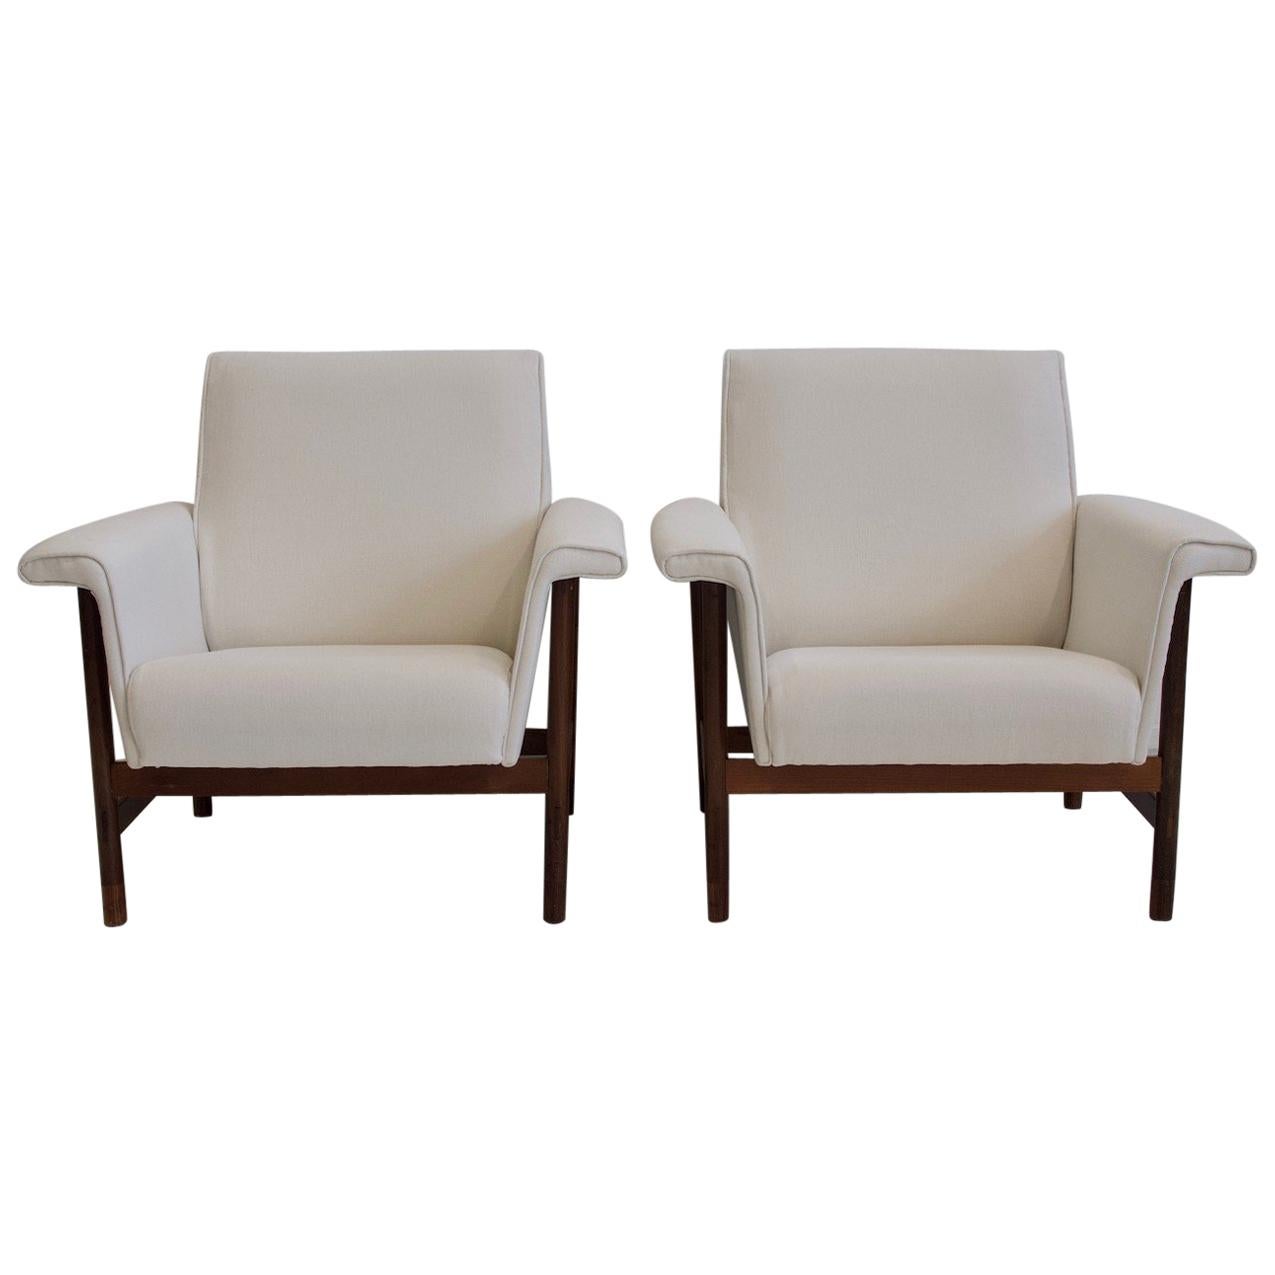 Pair of White Armchairs with Wooden Frame